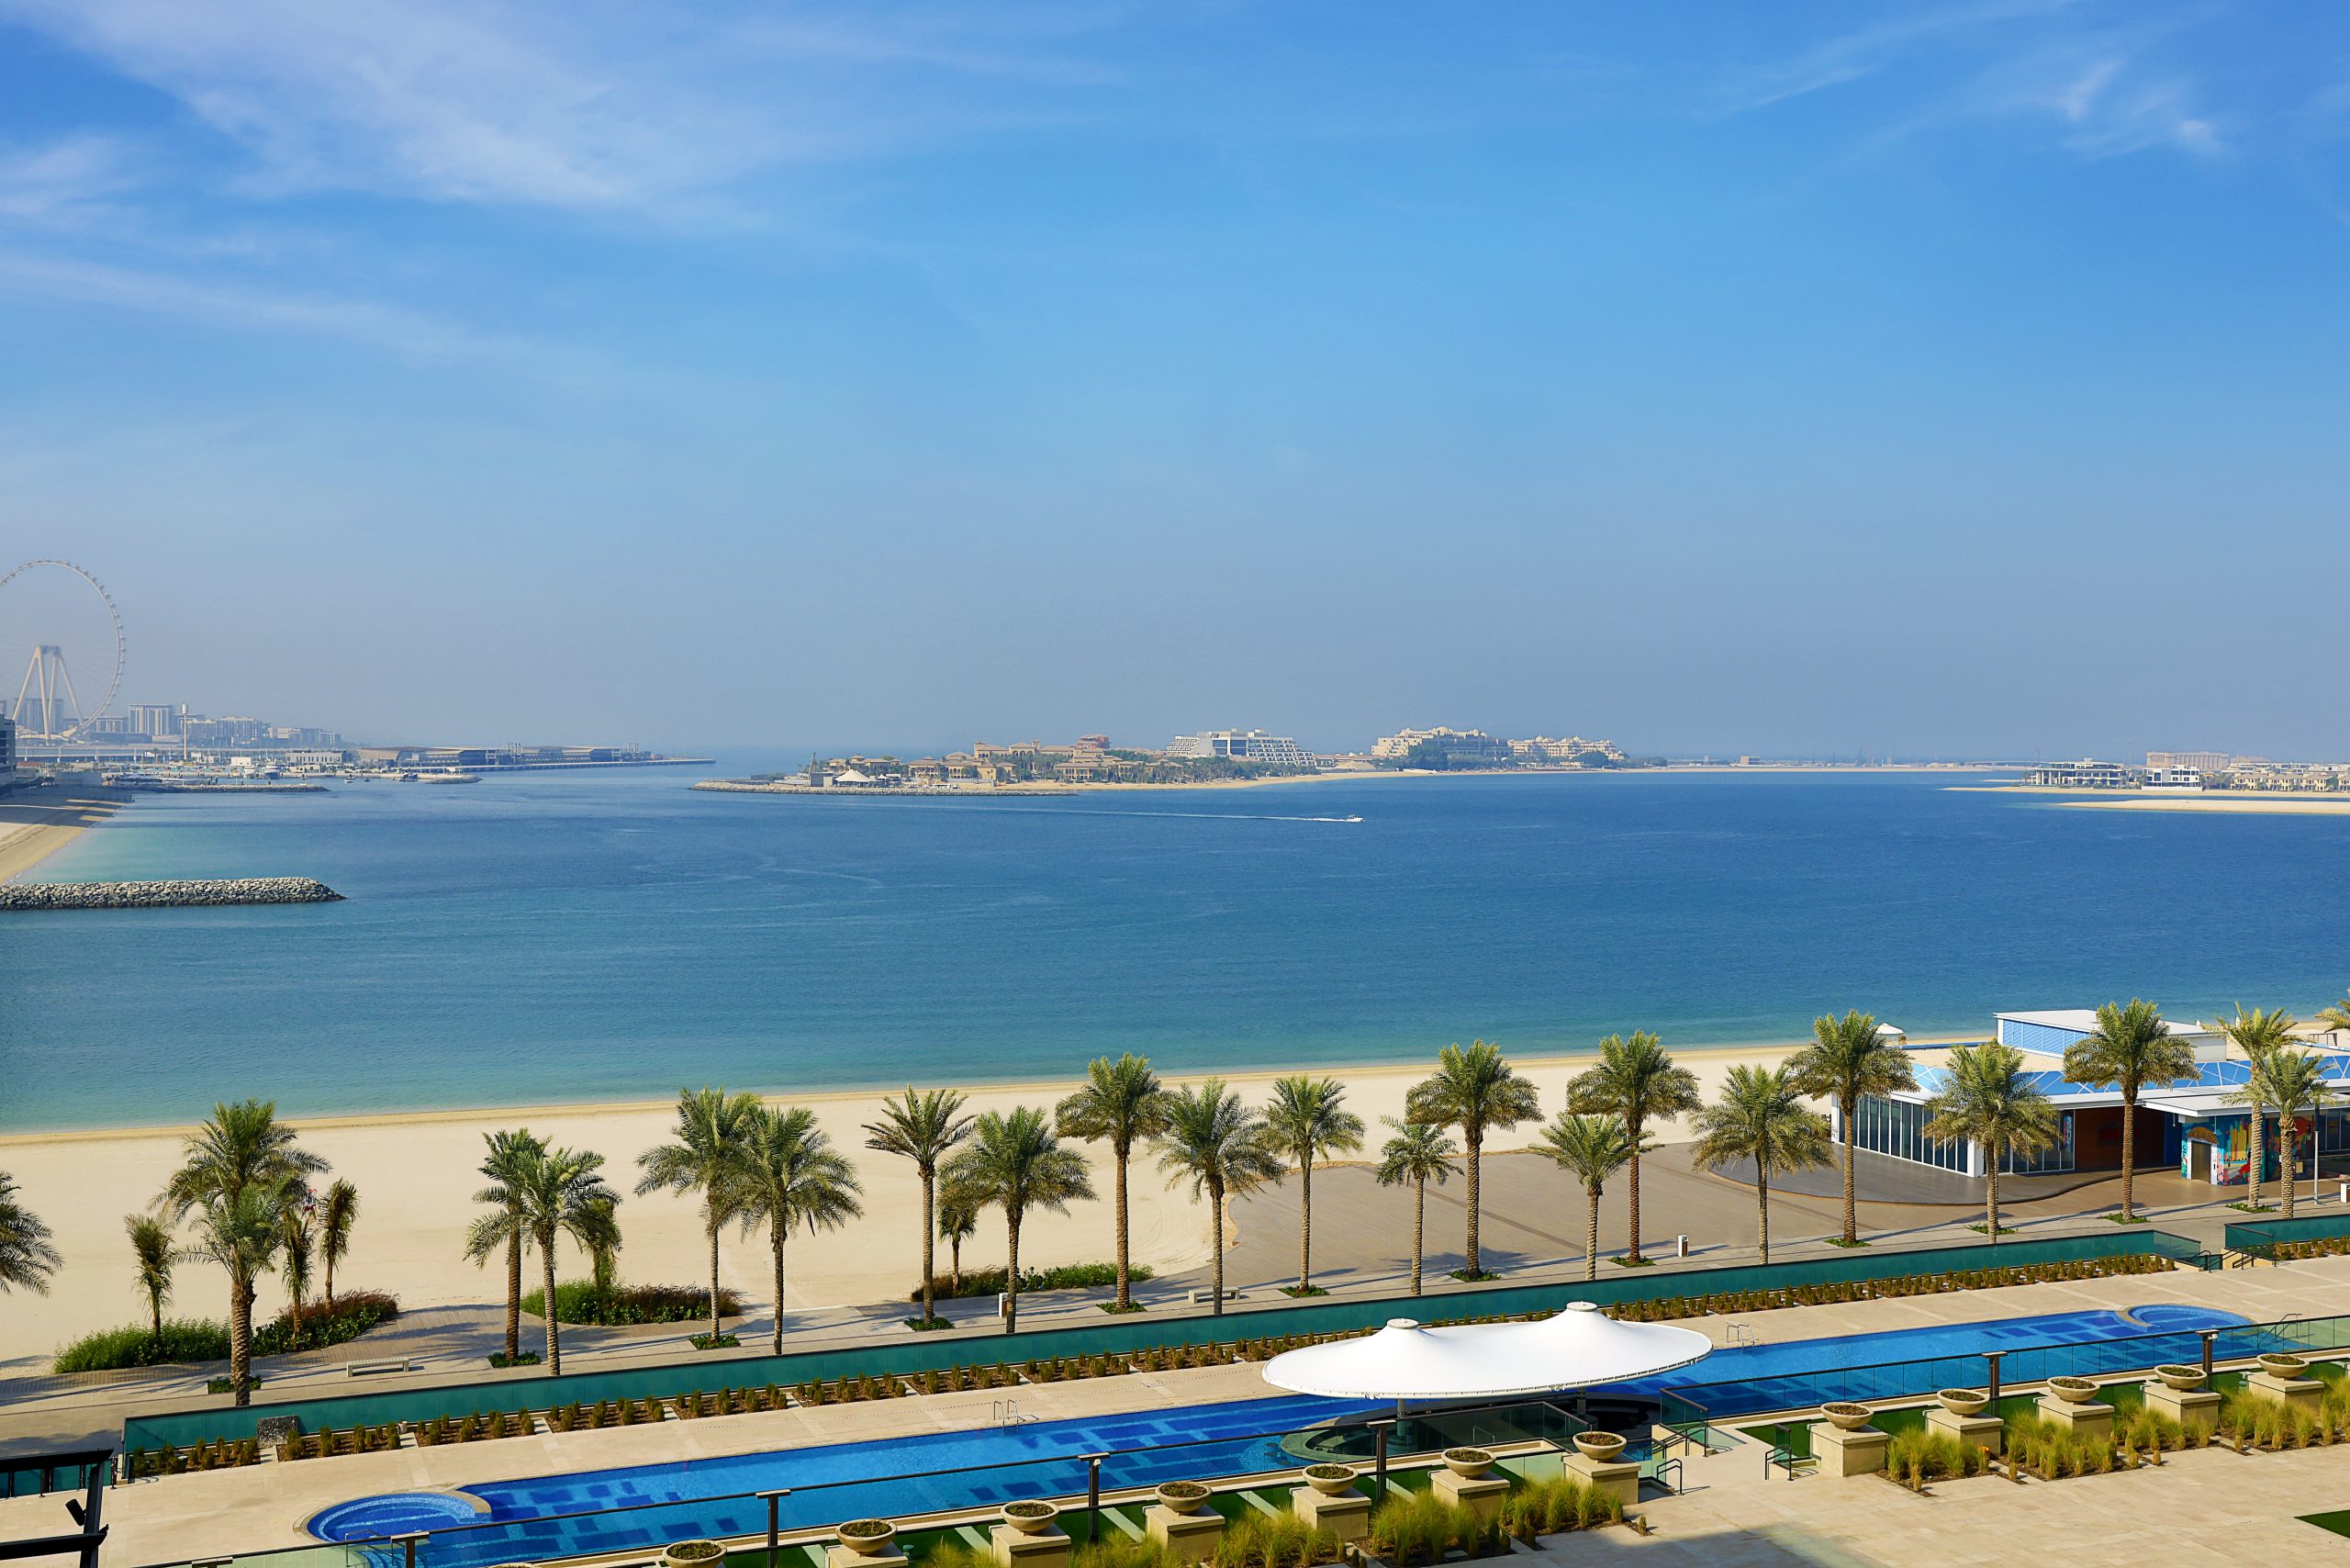 Marriott Resorts announces plans to open the first Marriott Resort in the UAE in December this year.